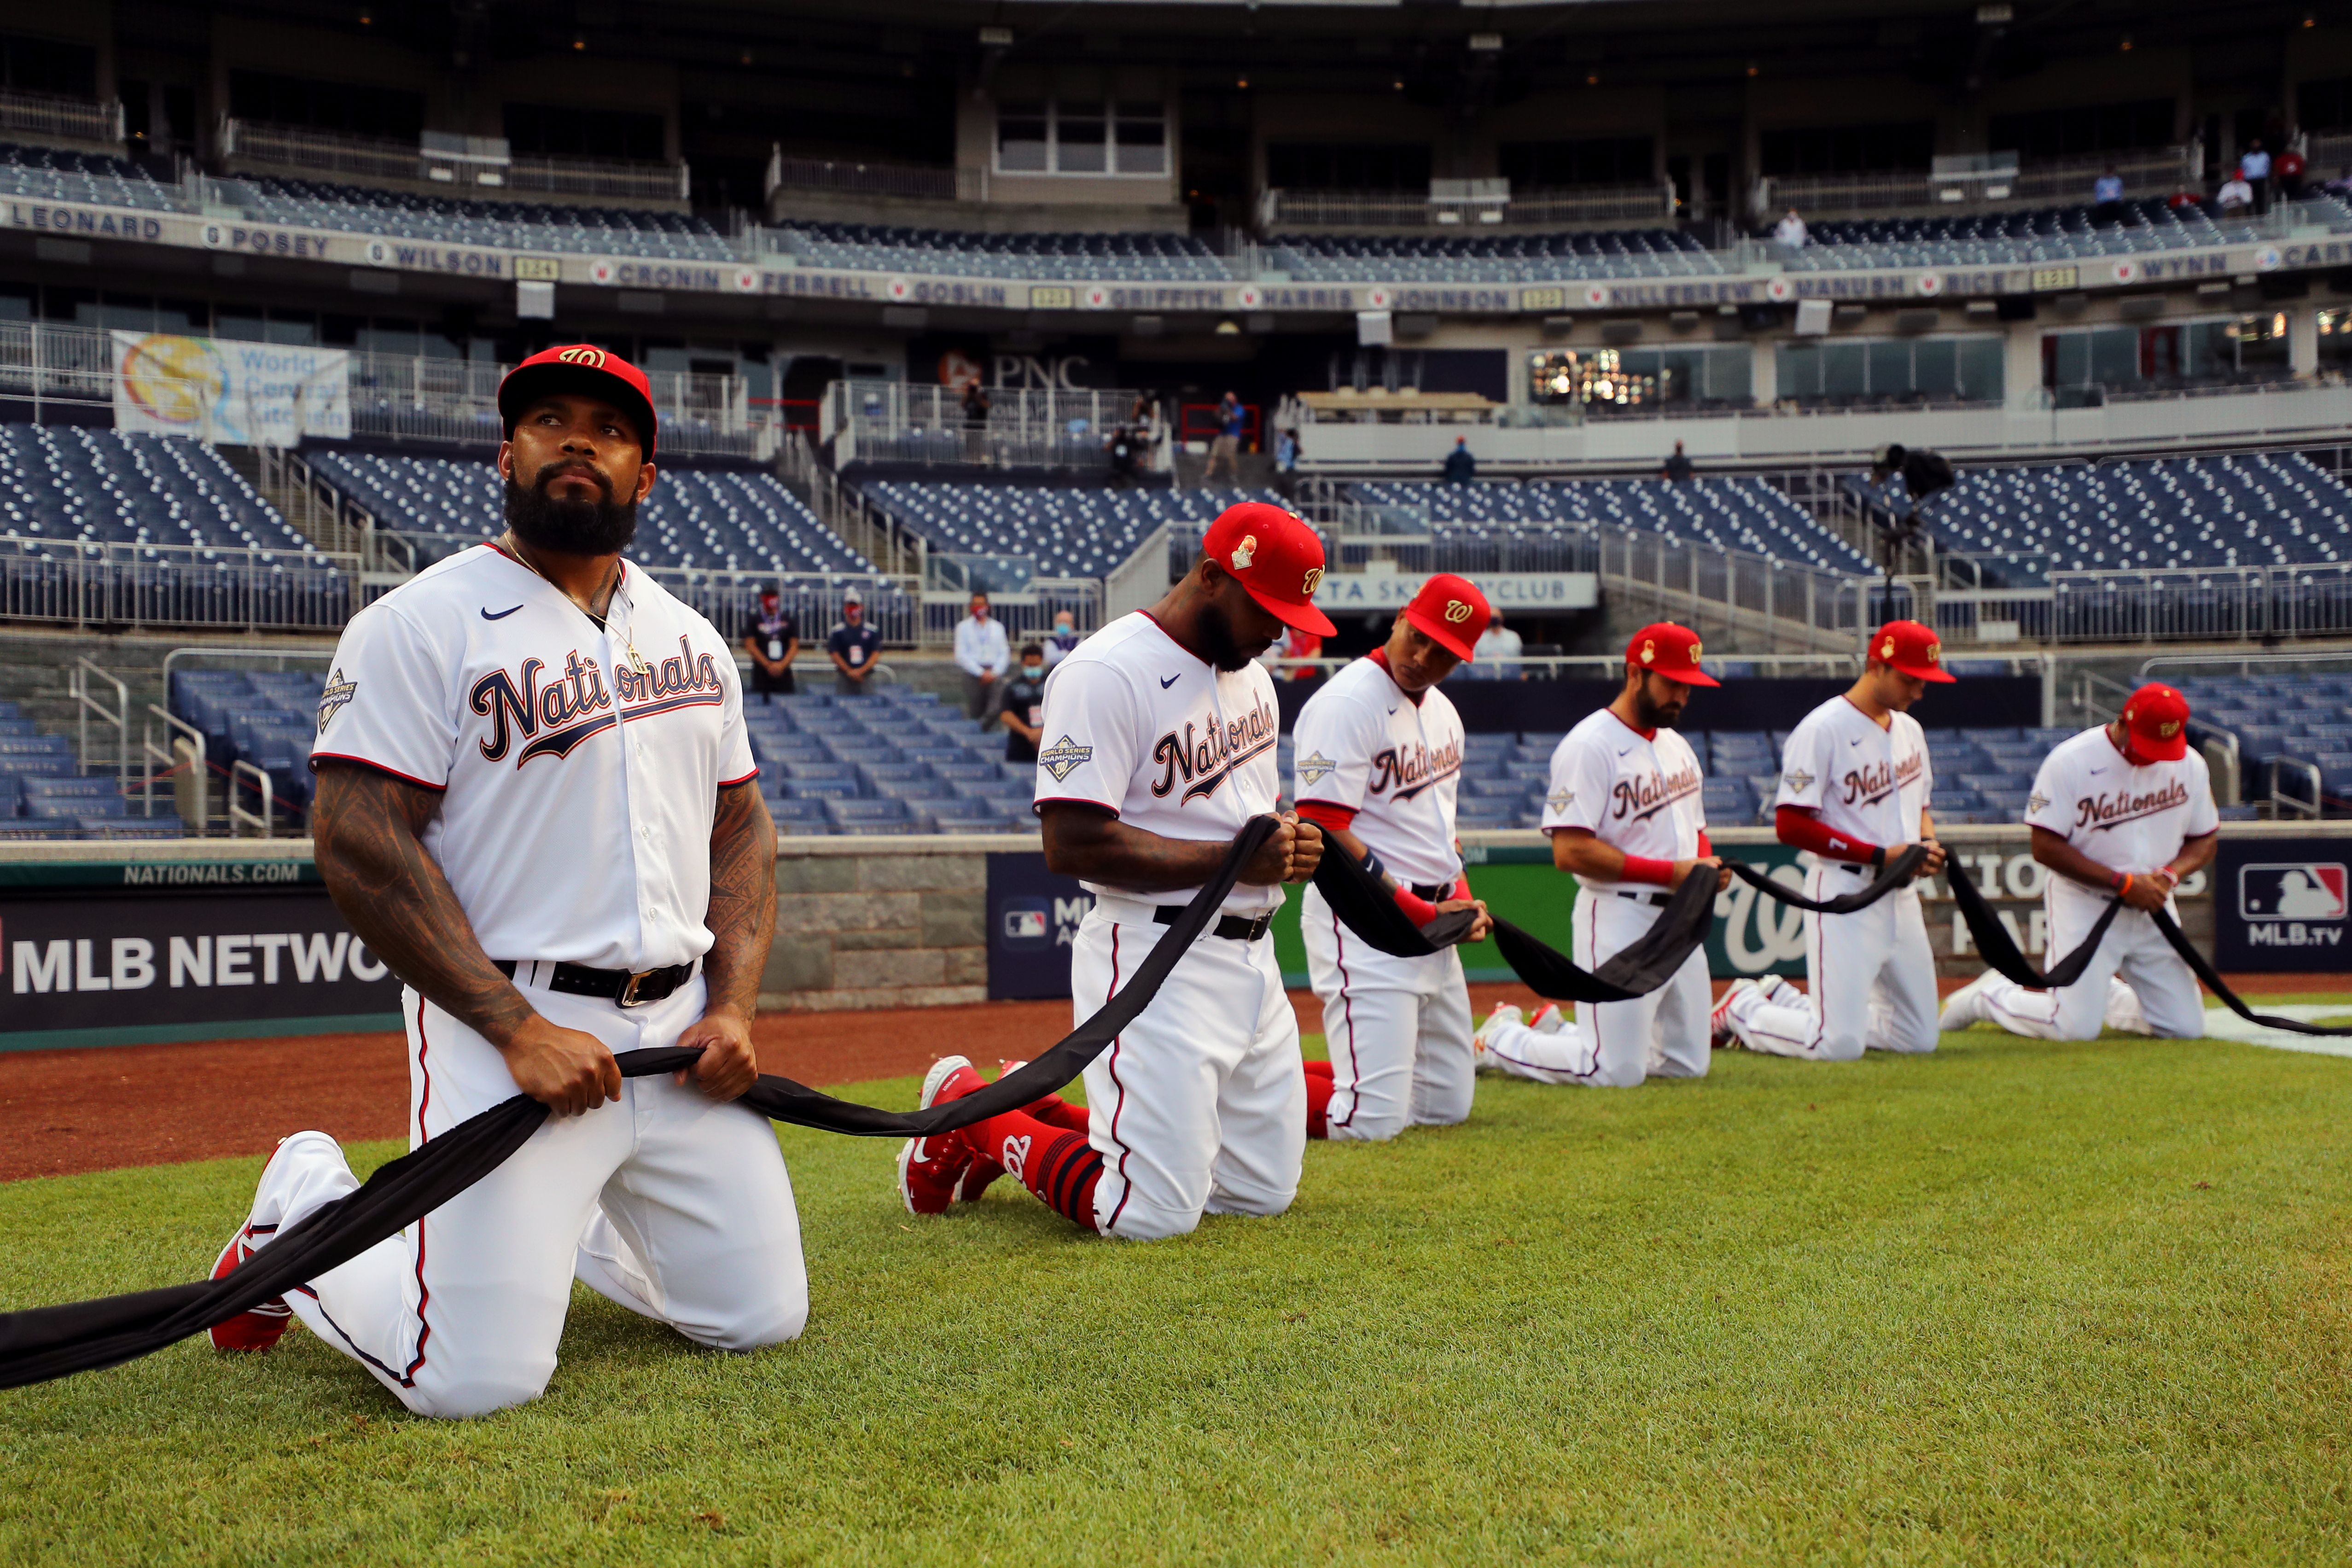 Nationals players kneeling and holding a black ribbon to show their support for the Black Lives Matter movement.